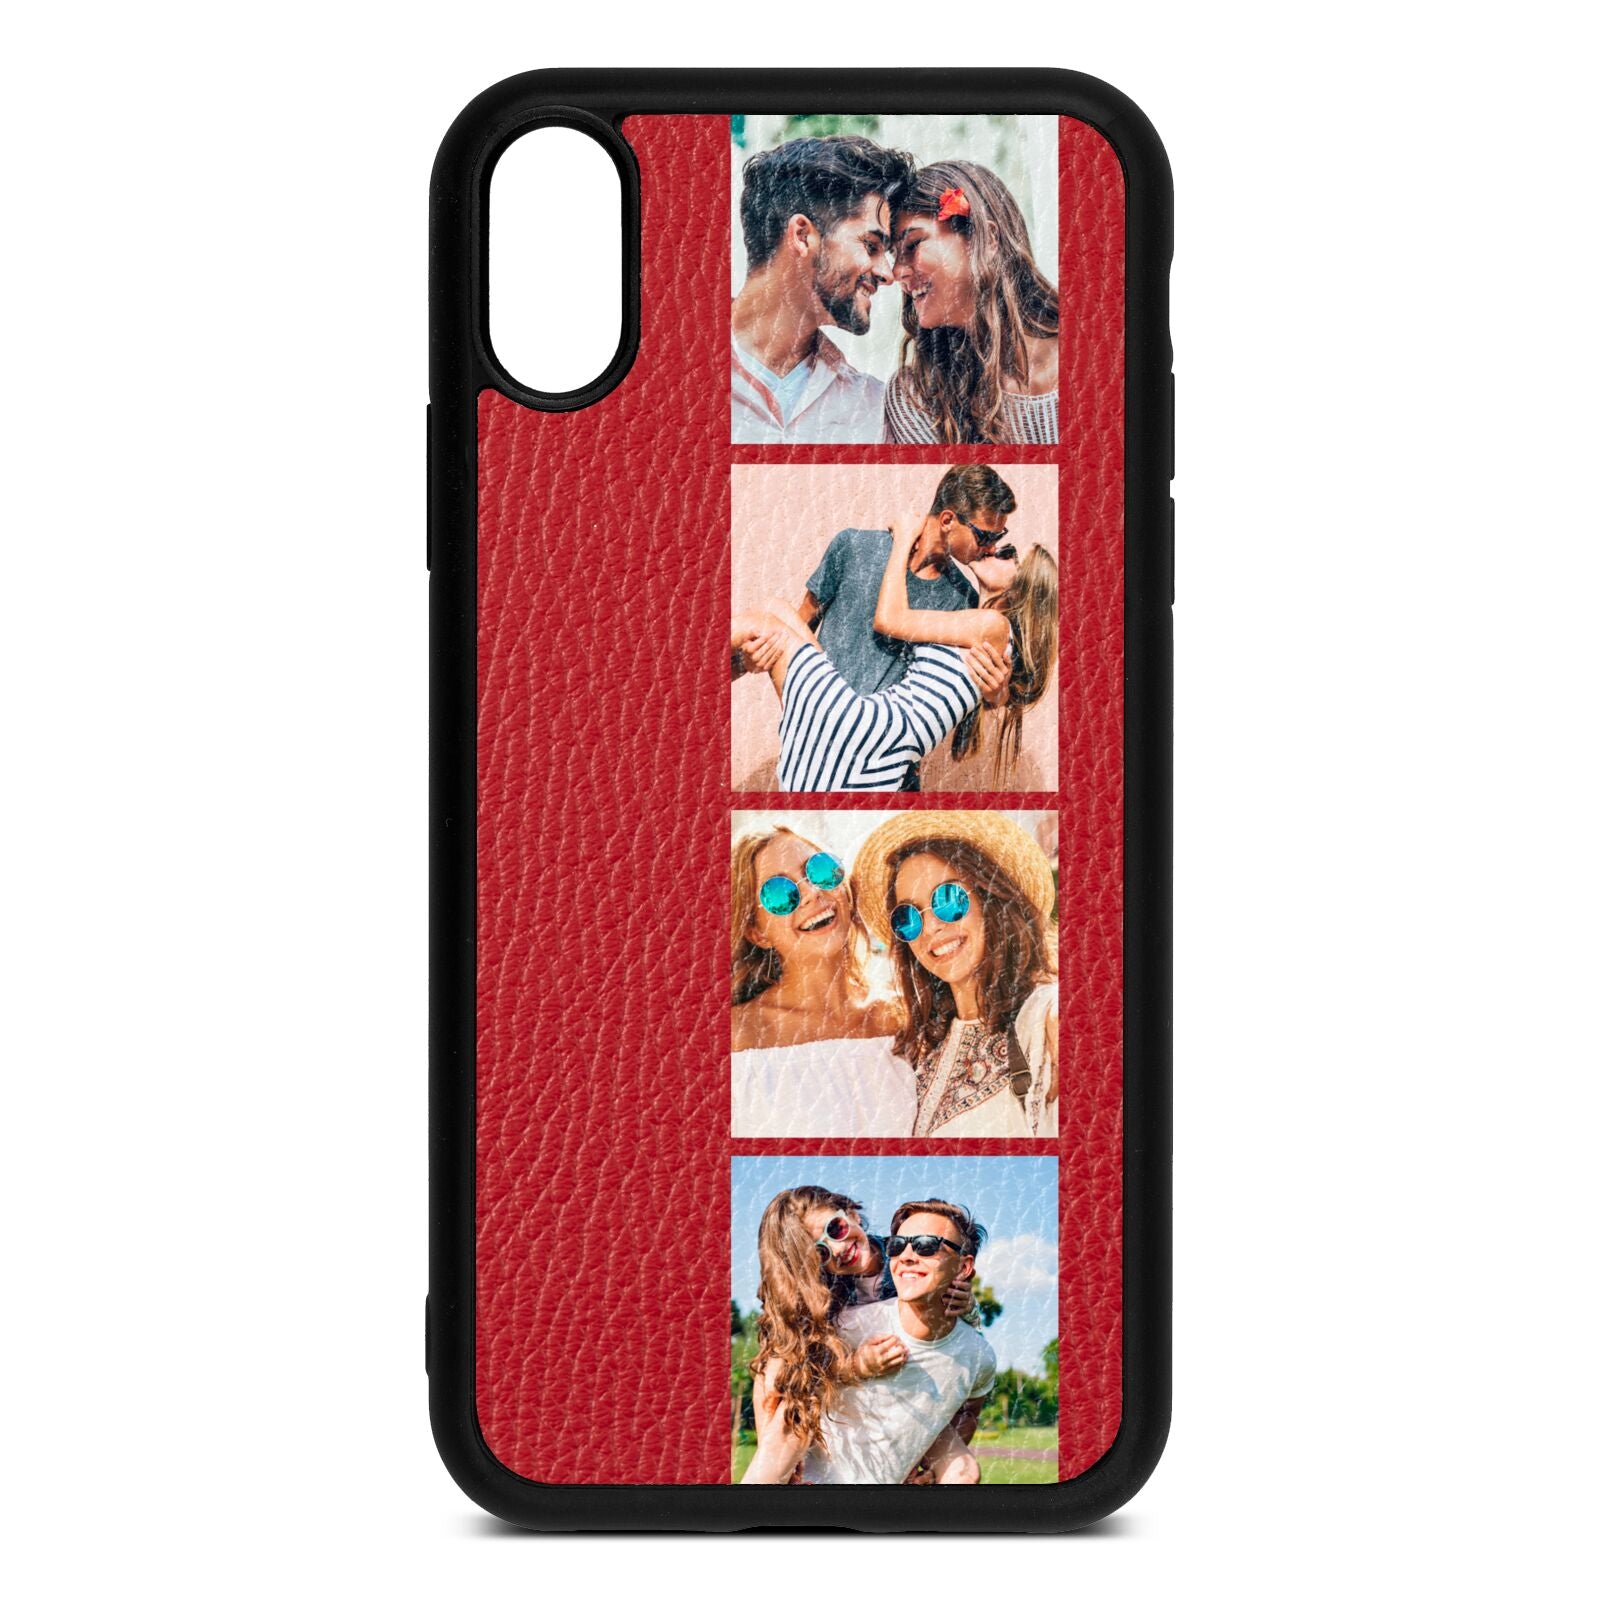 Photo Strip Montage Upload Red Pebble Leather iPhone Xr Case